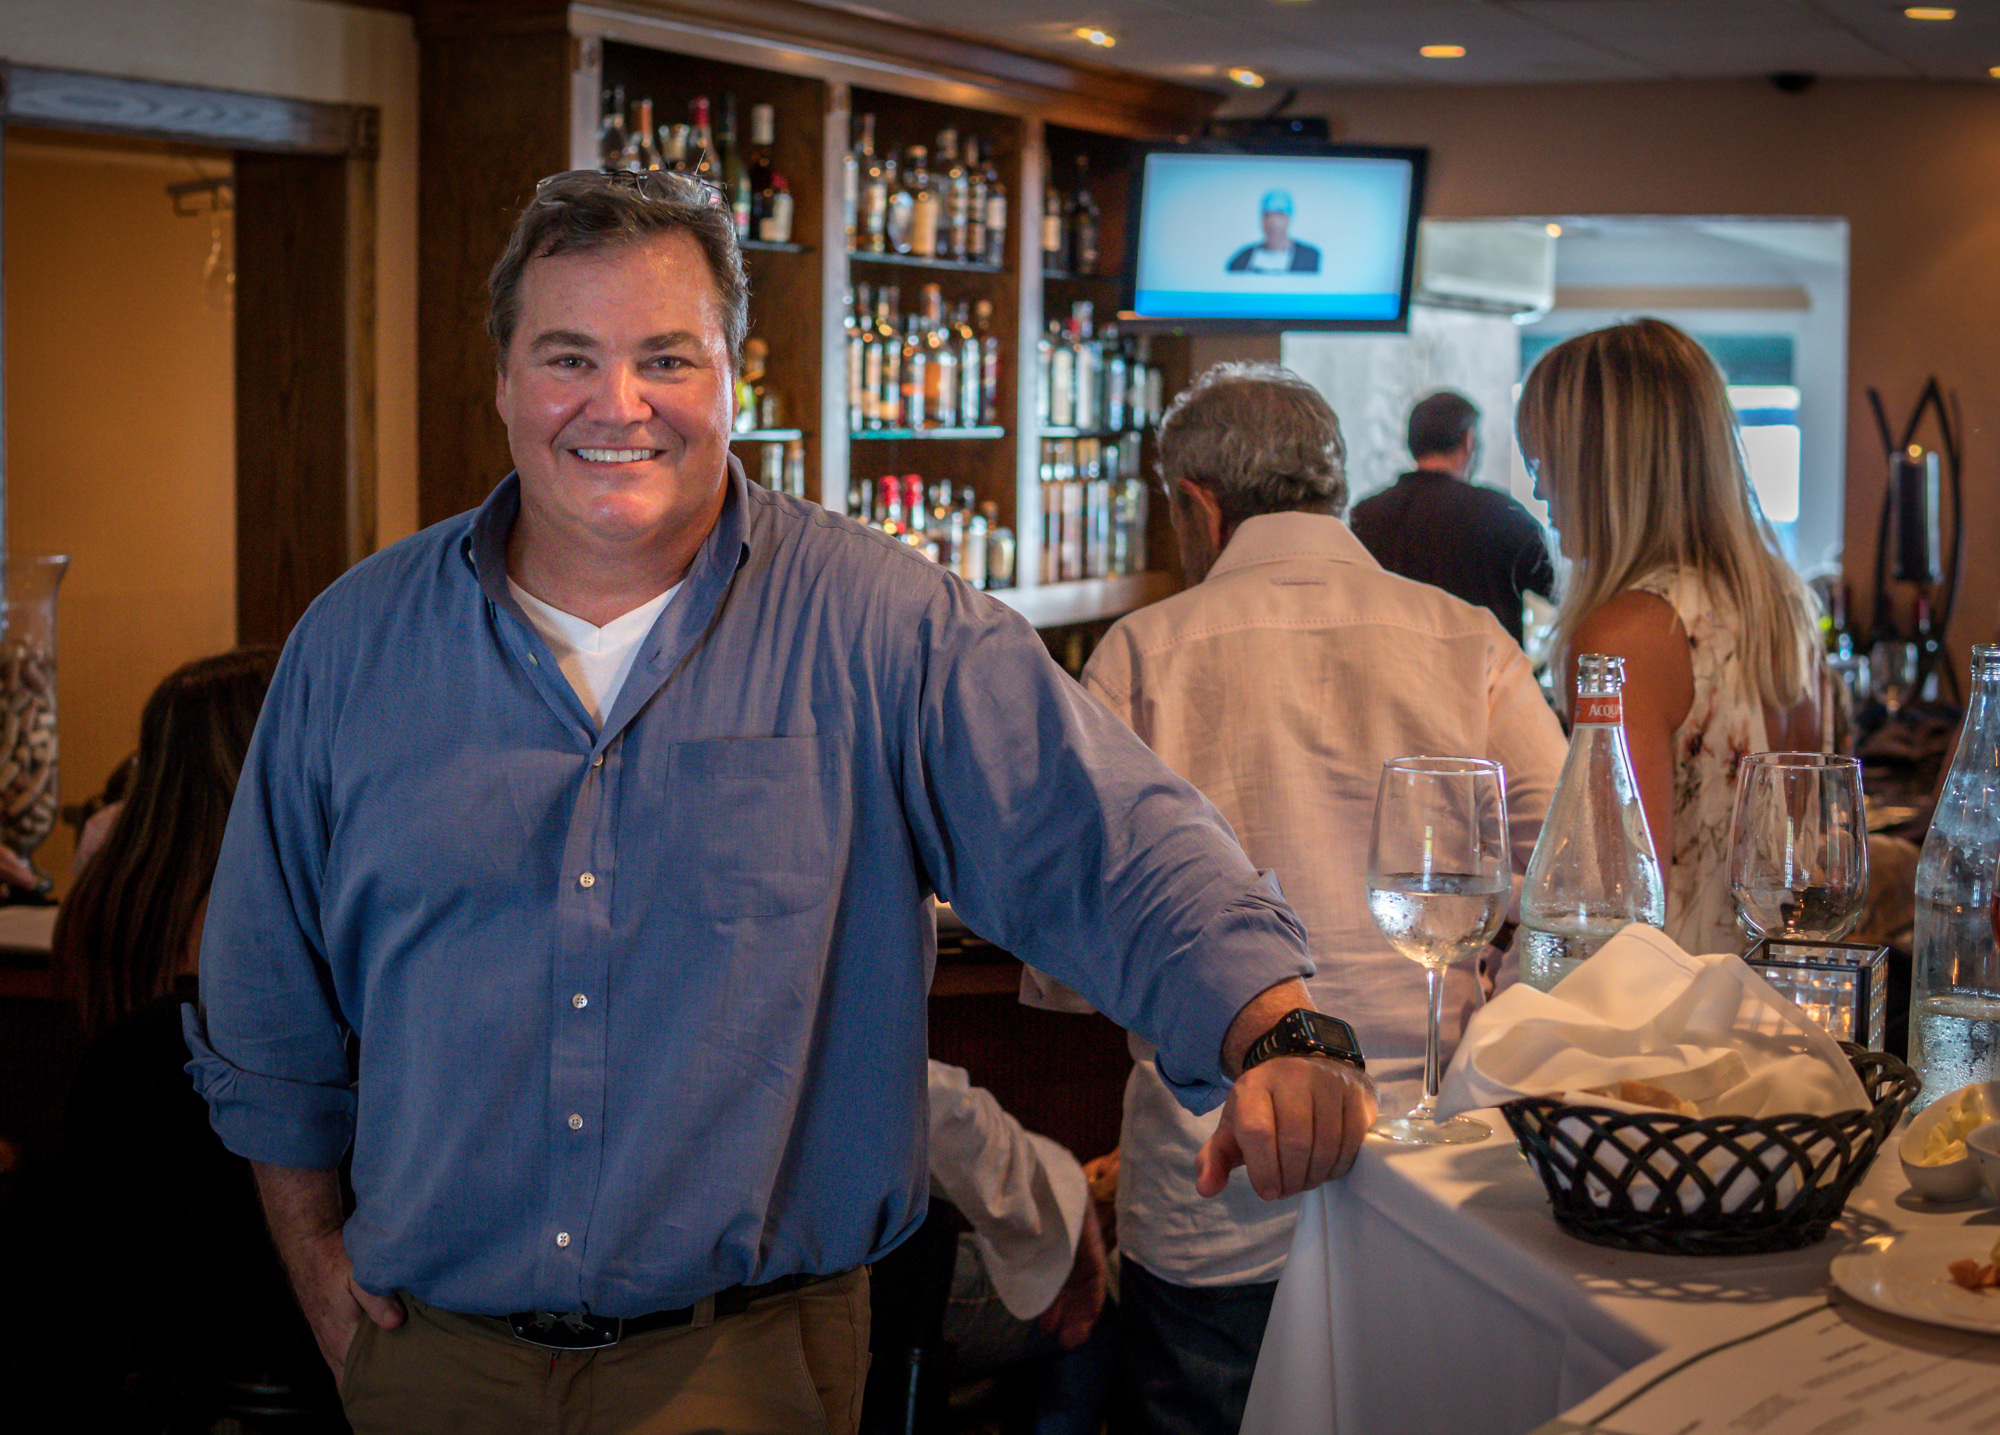 Tommy Klauber, owner and chef of Pattigeorge's, served his last dinners at the restaurant Saturday night. Photo by Dex Honea